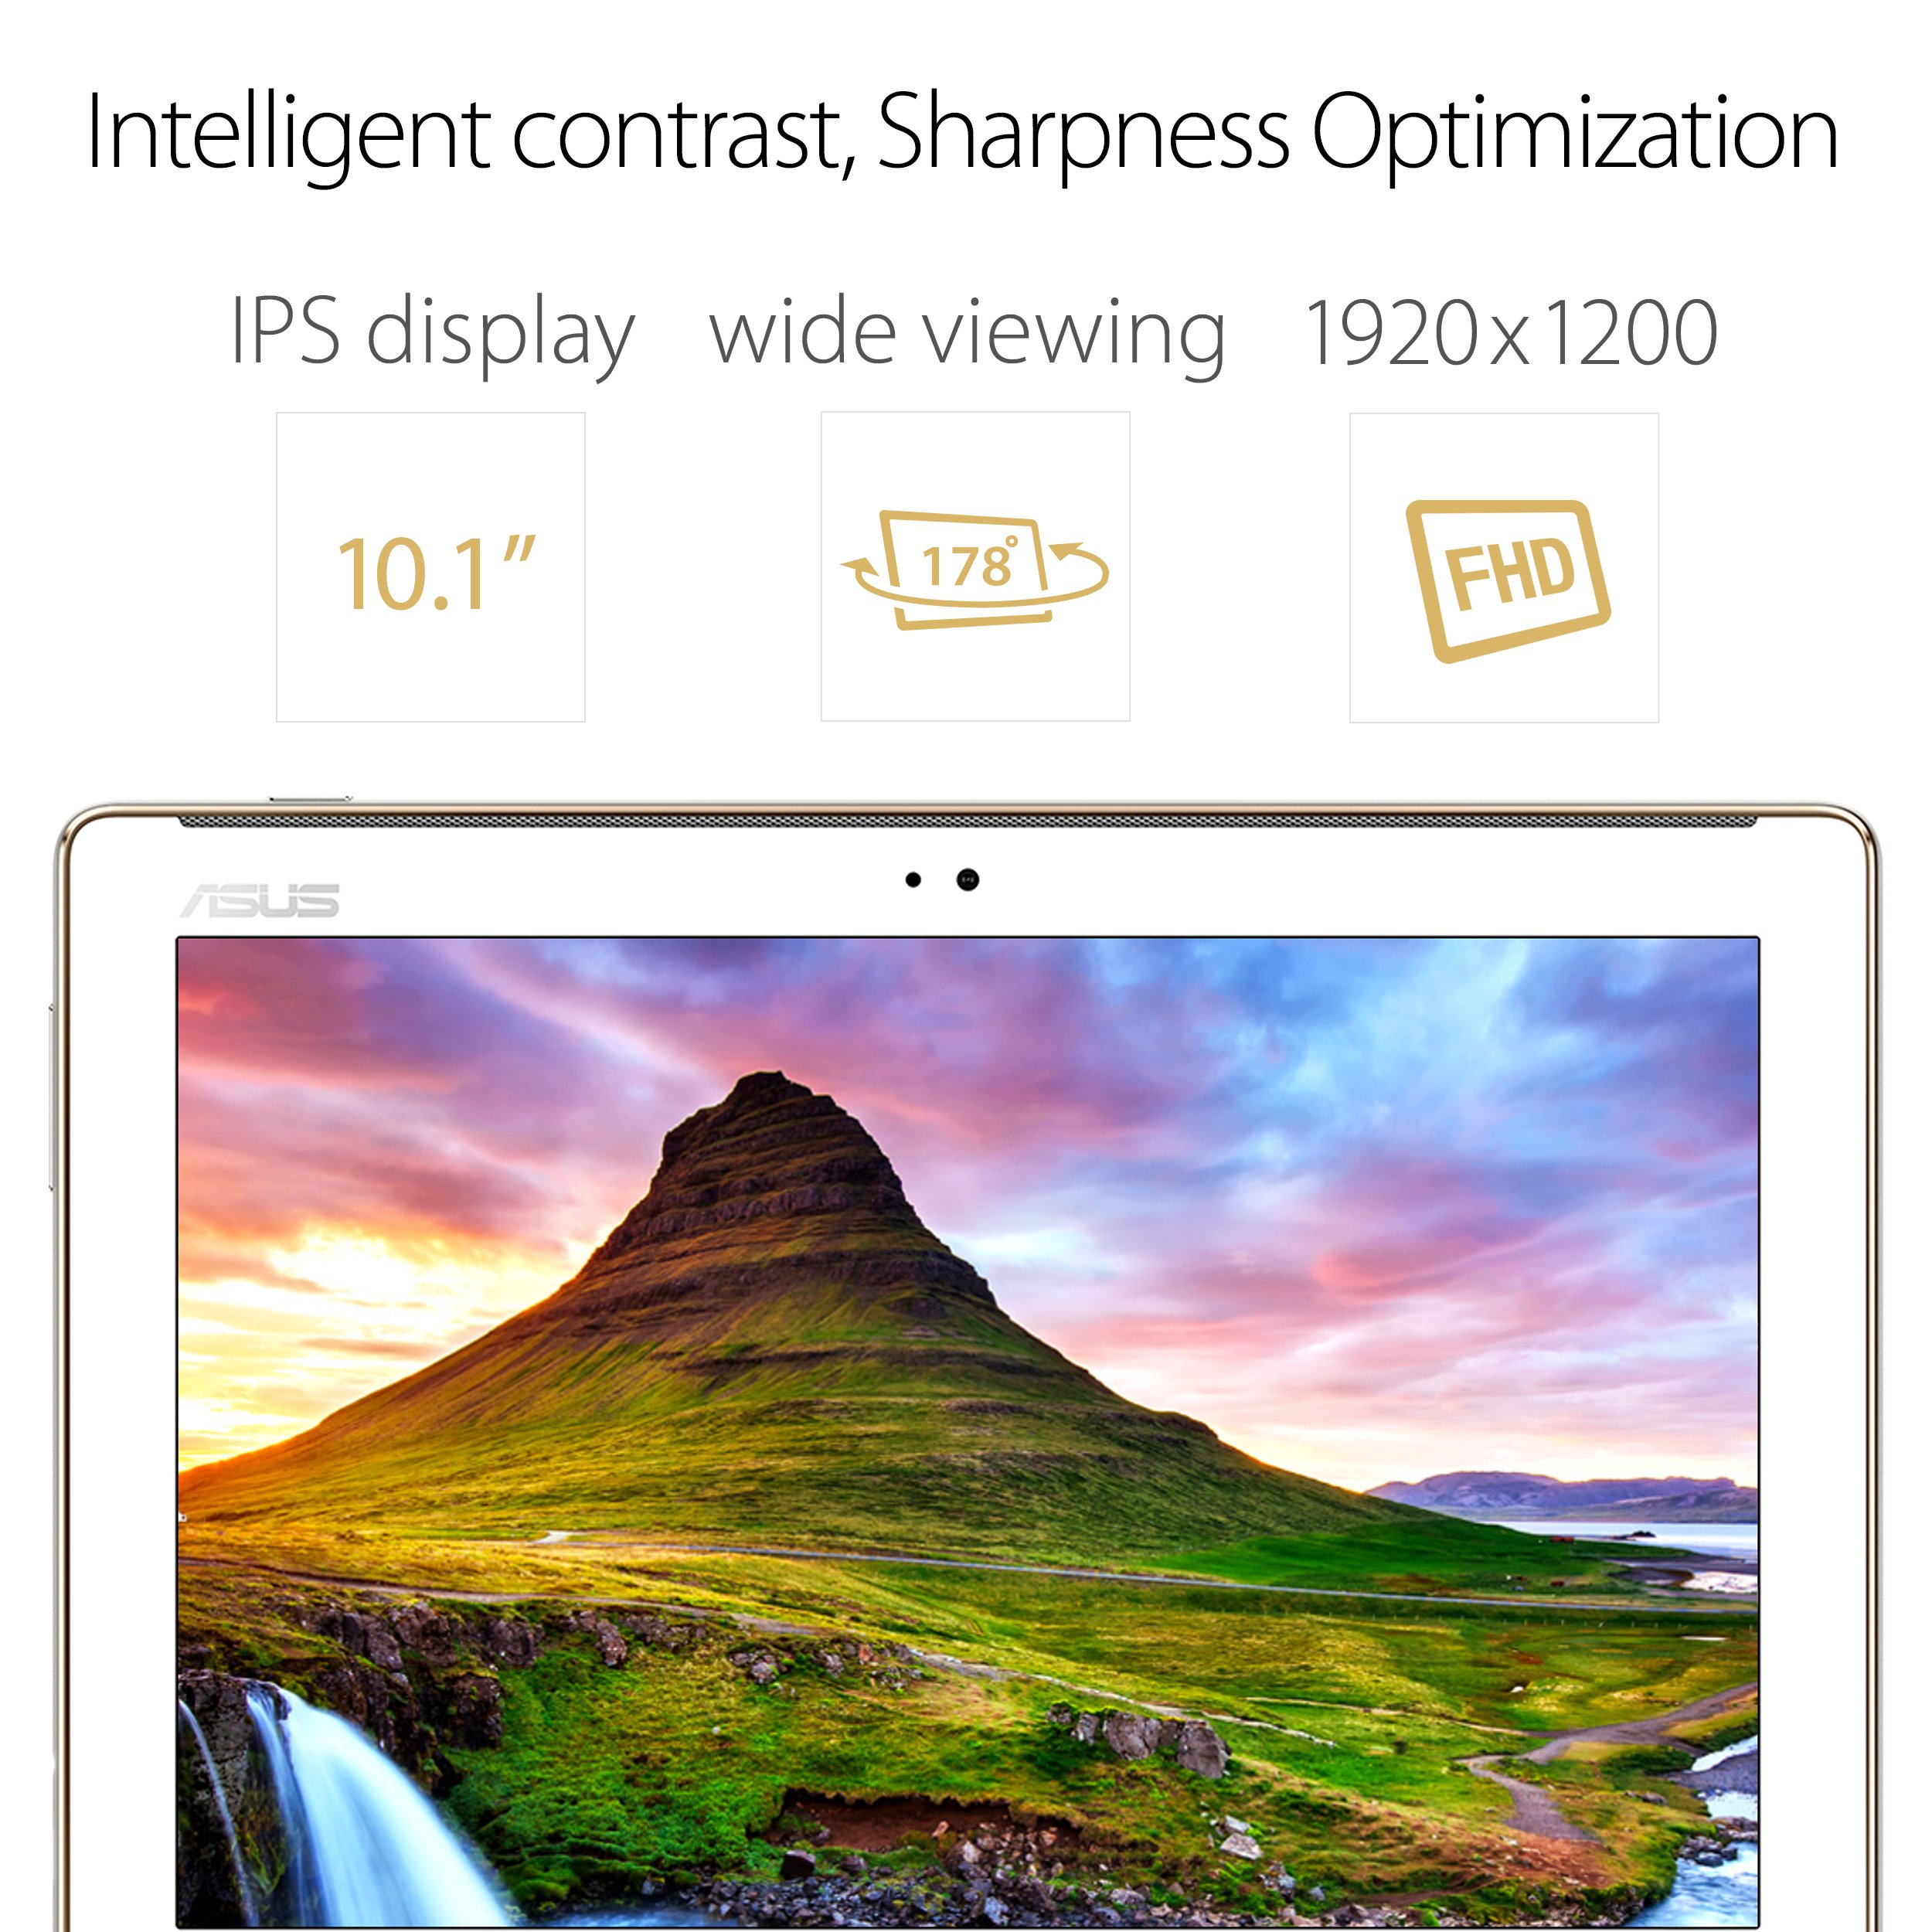 ASUS ZenPad 10 10.1-inch IPS WXGA (1920x1200) FHD Tablet, 2GB RAM 16GB storage, 4680 mAh battery, Android 7.0, Pearl White (Z301MF-A2-WH)